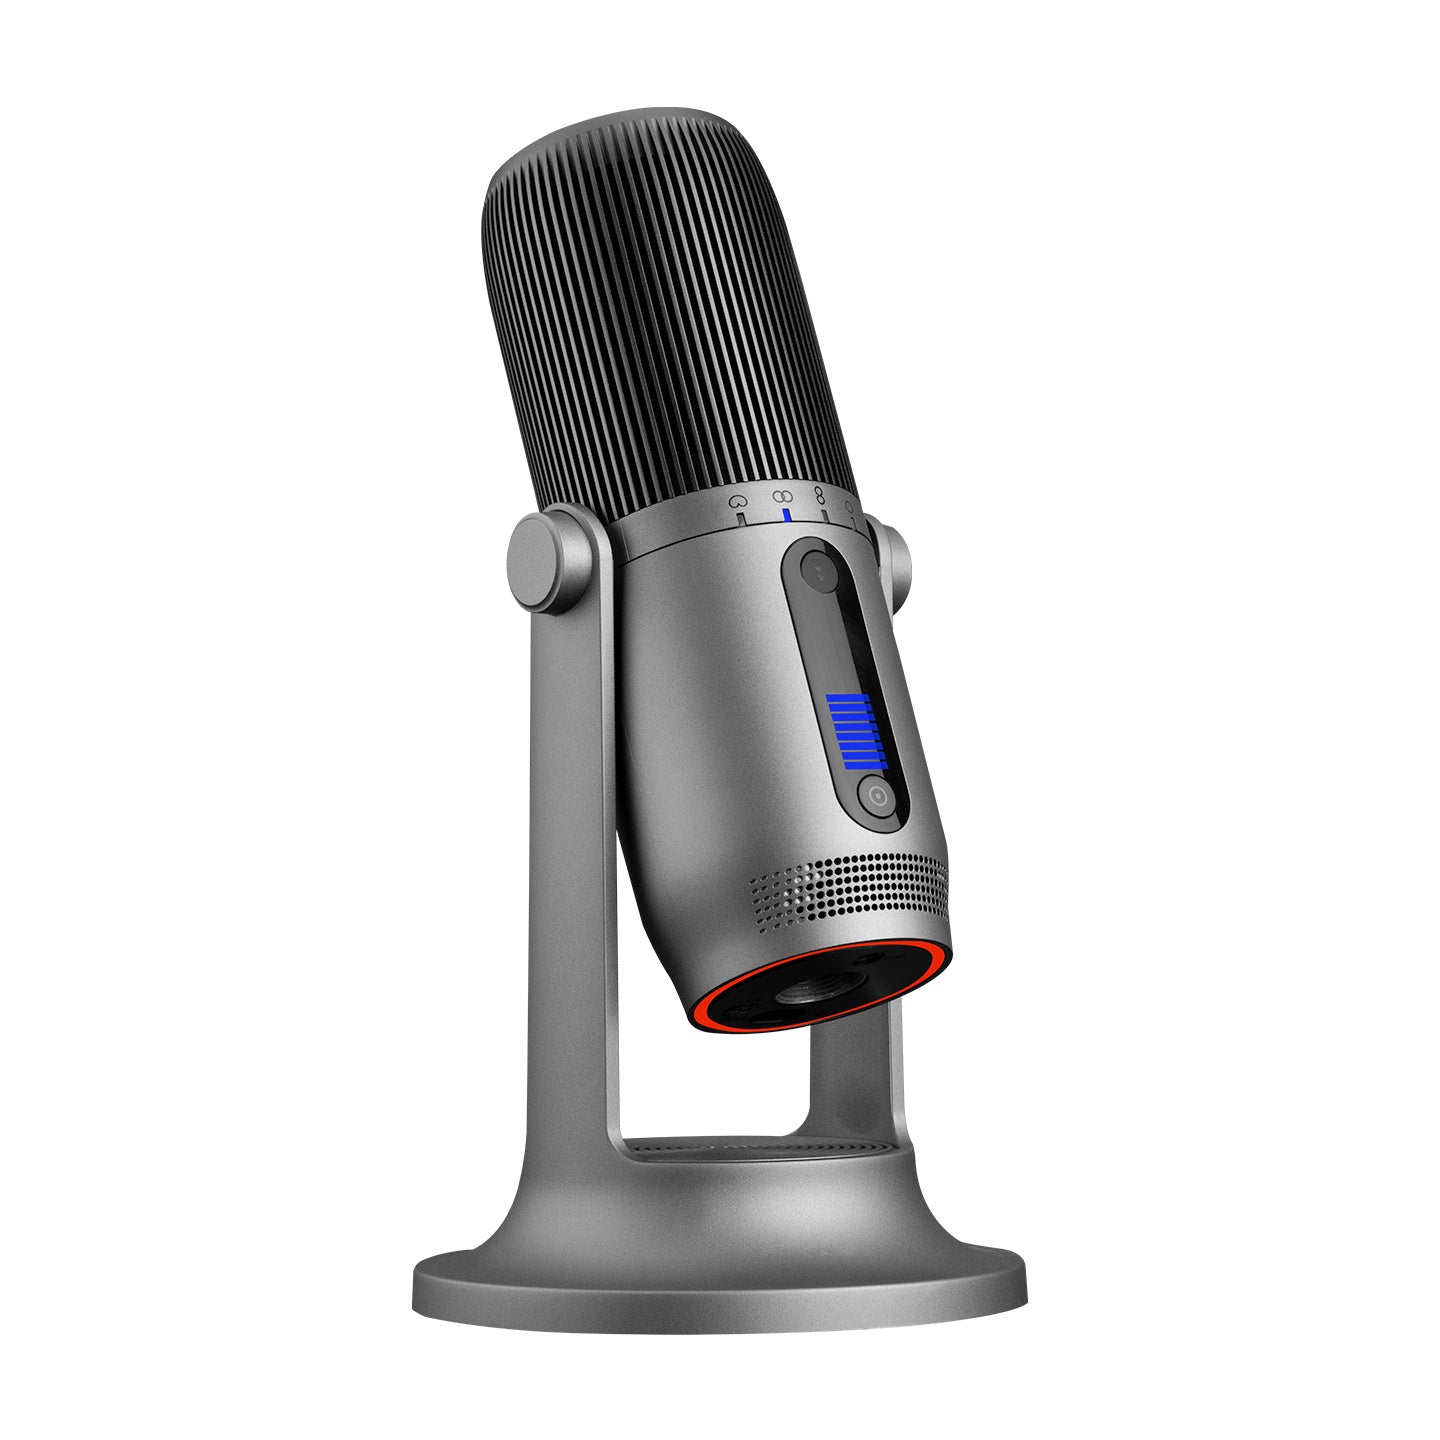 Thronmax MDrill One Pro USB Microphone - Grey